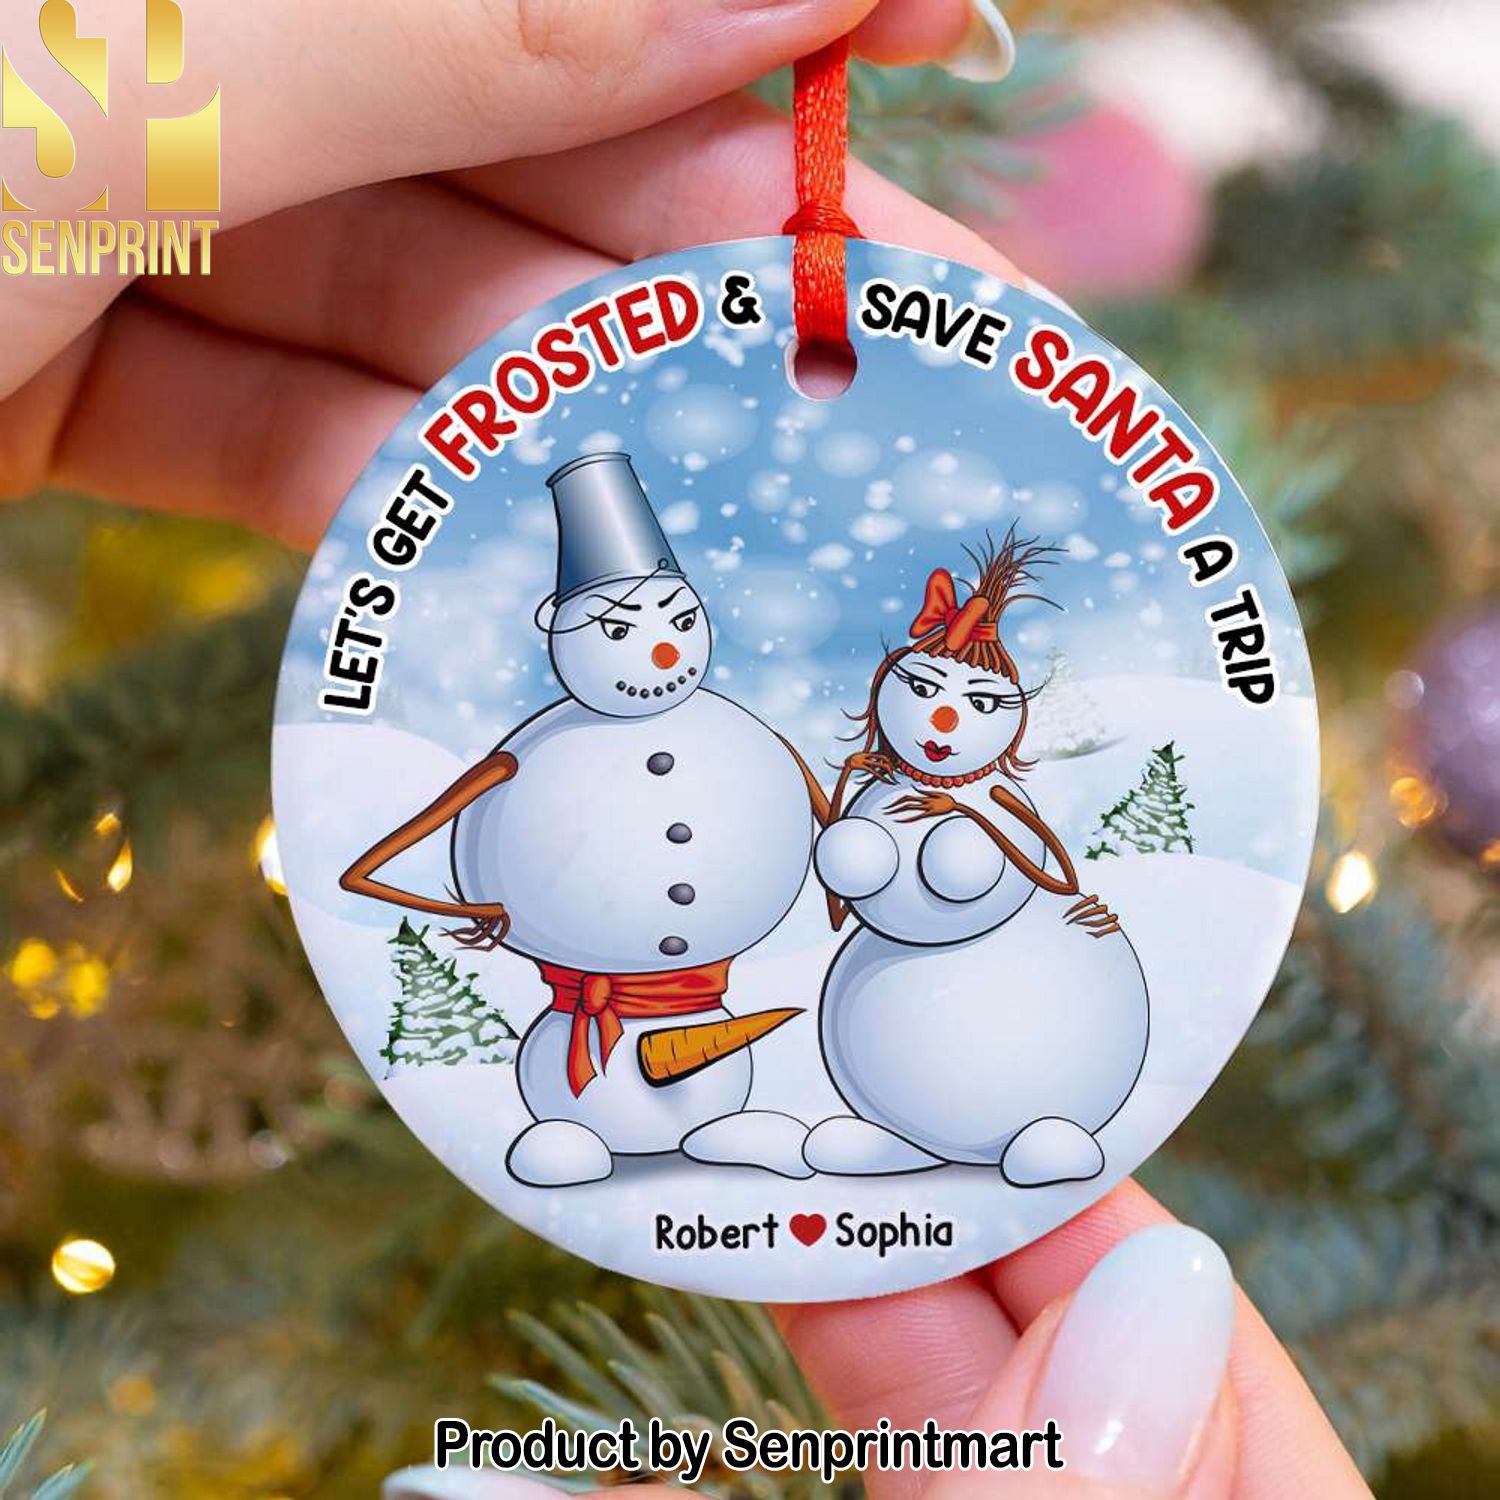 Funny Couple, Let’s Get Frosted and Save Santa A Trip, Personalized Ornament, Couple Gifts, Gifts For Him Her, Chritsmas Tree Decorations, Unique Christmas Gifts